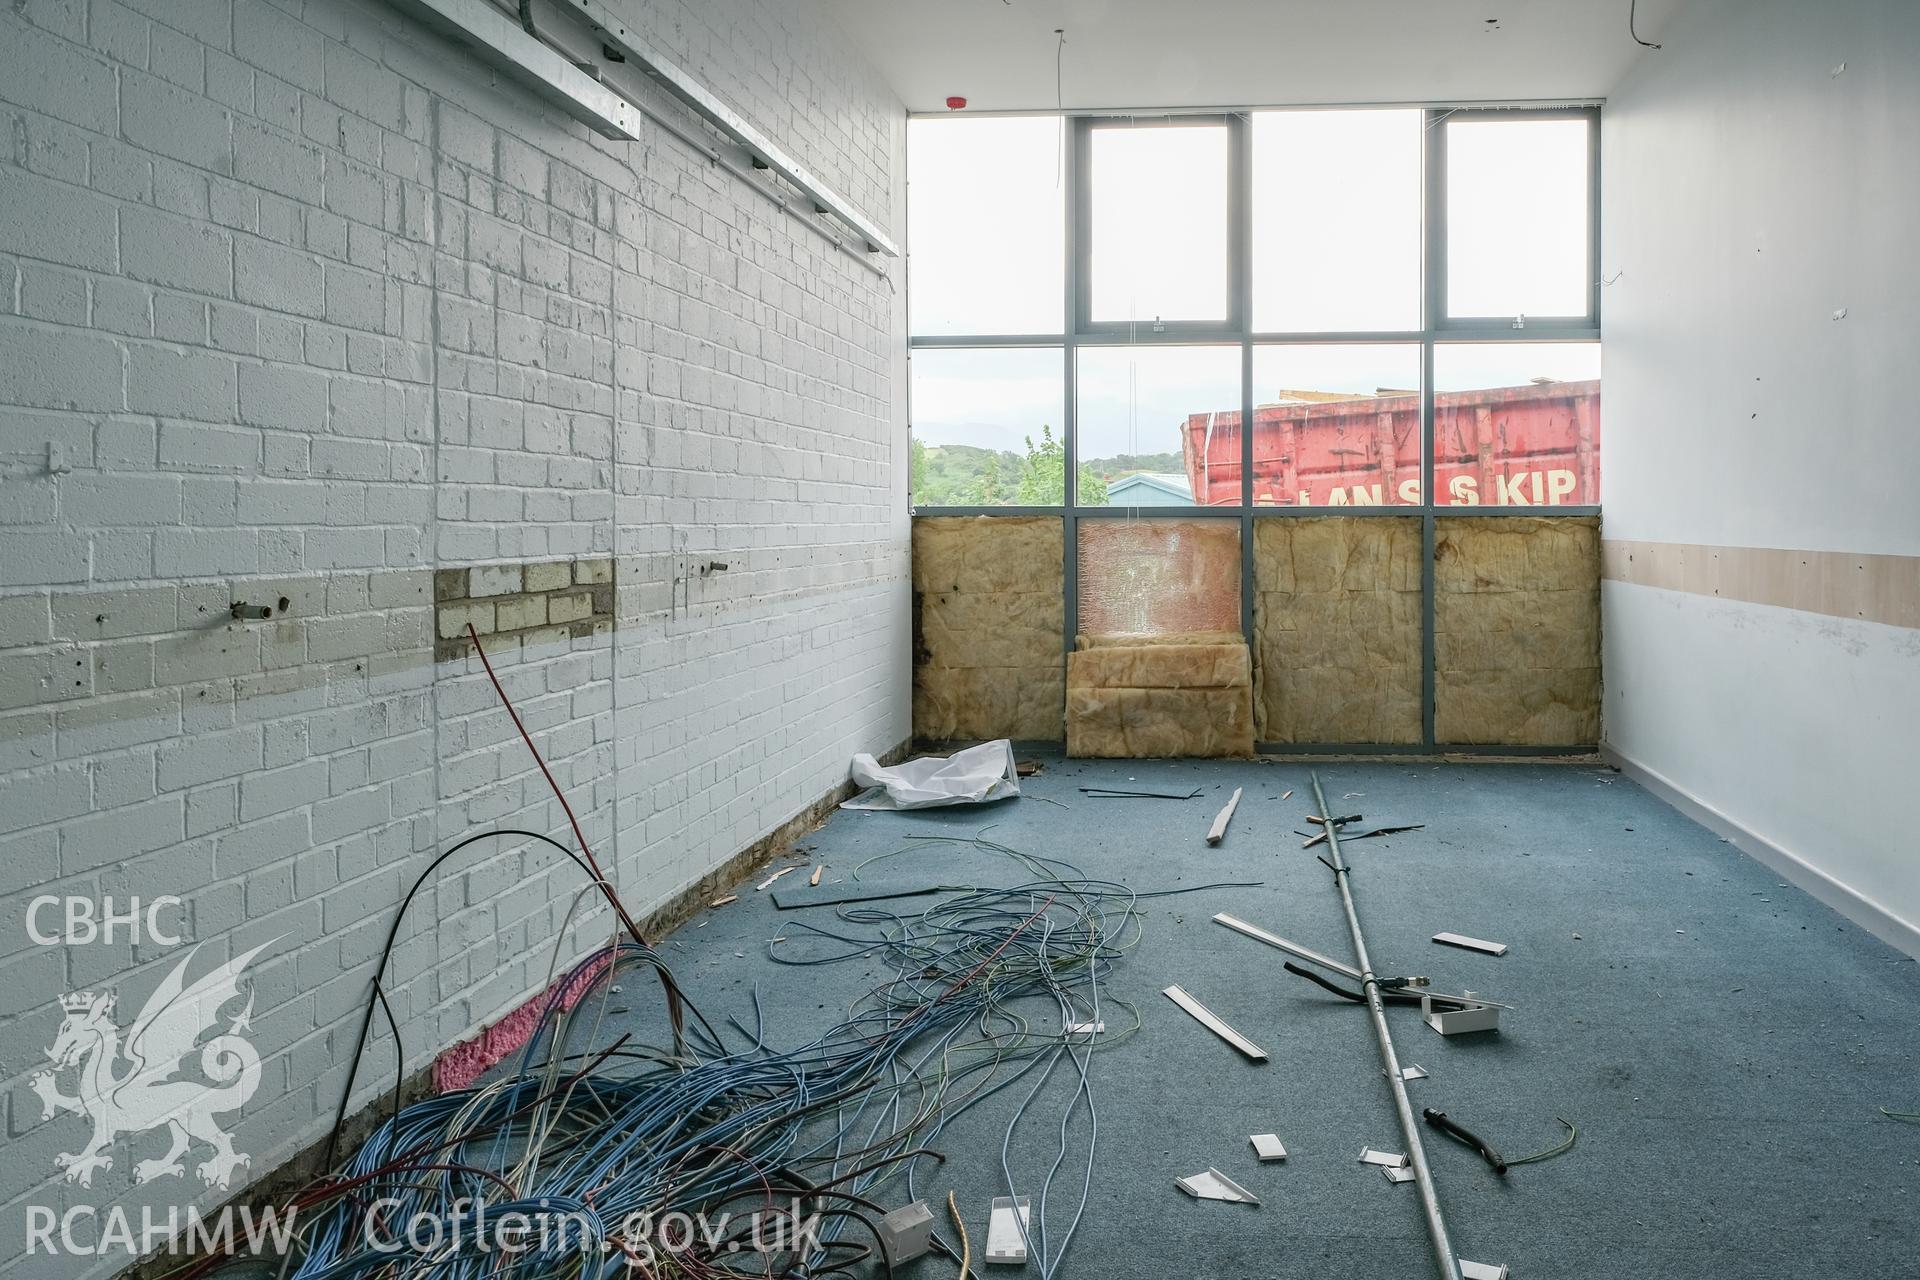 Digital colour photograph showing detailed interior view of room at Caernarfonshire Technical College, Ffriddoedd Road, Bangor. Photographed by Dilys Morgan and donated by Wyn Thomas of Grwp Llandrillo-Menai Further Education College, 2019.